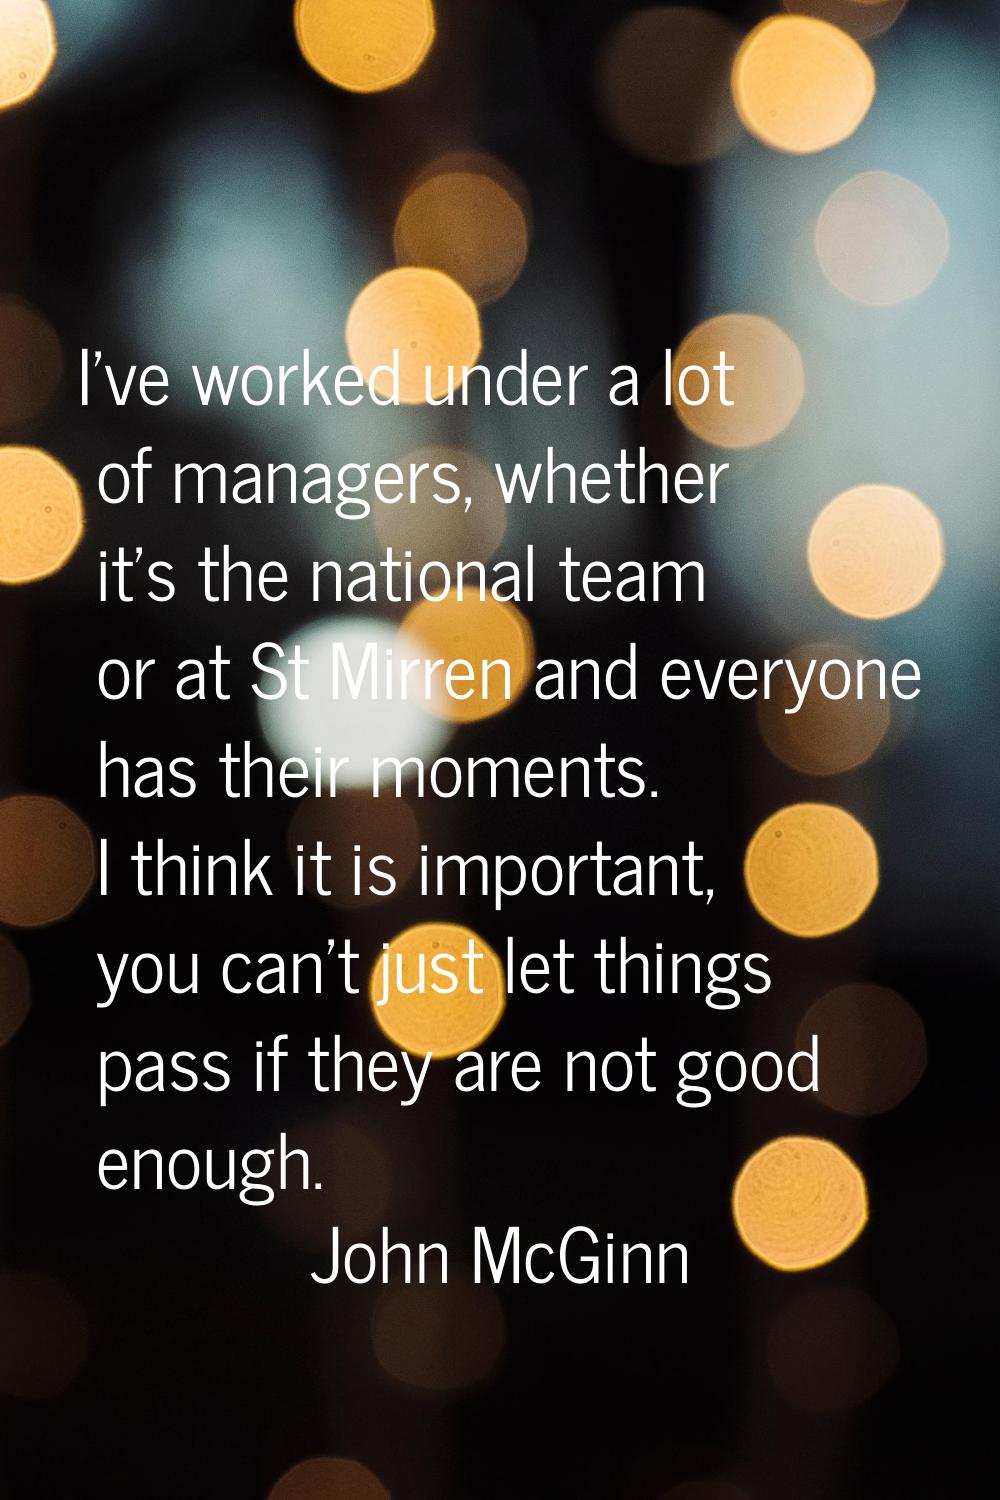 I've worked under a lot of managers, whether it's the national team or at St Mirren and everyone ha